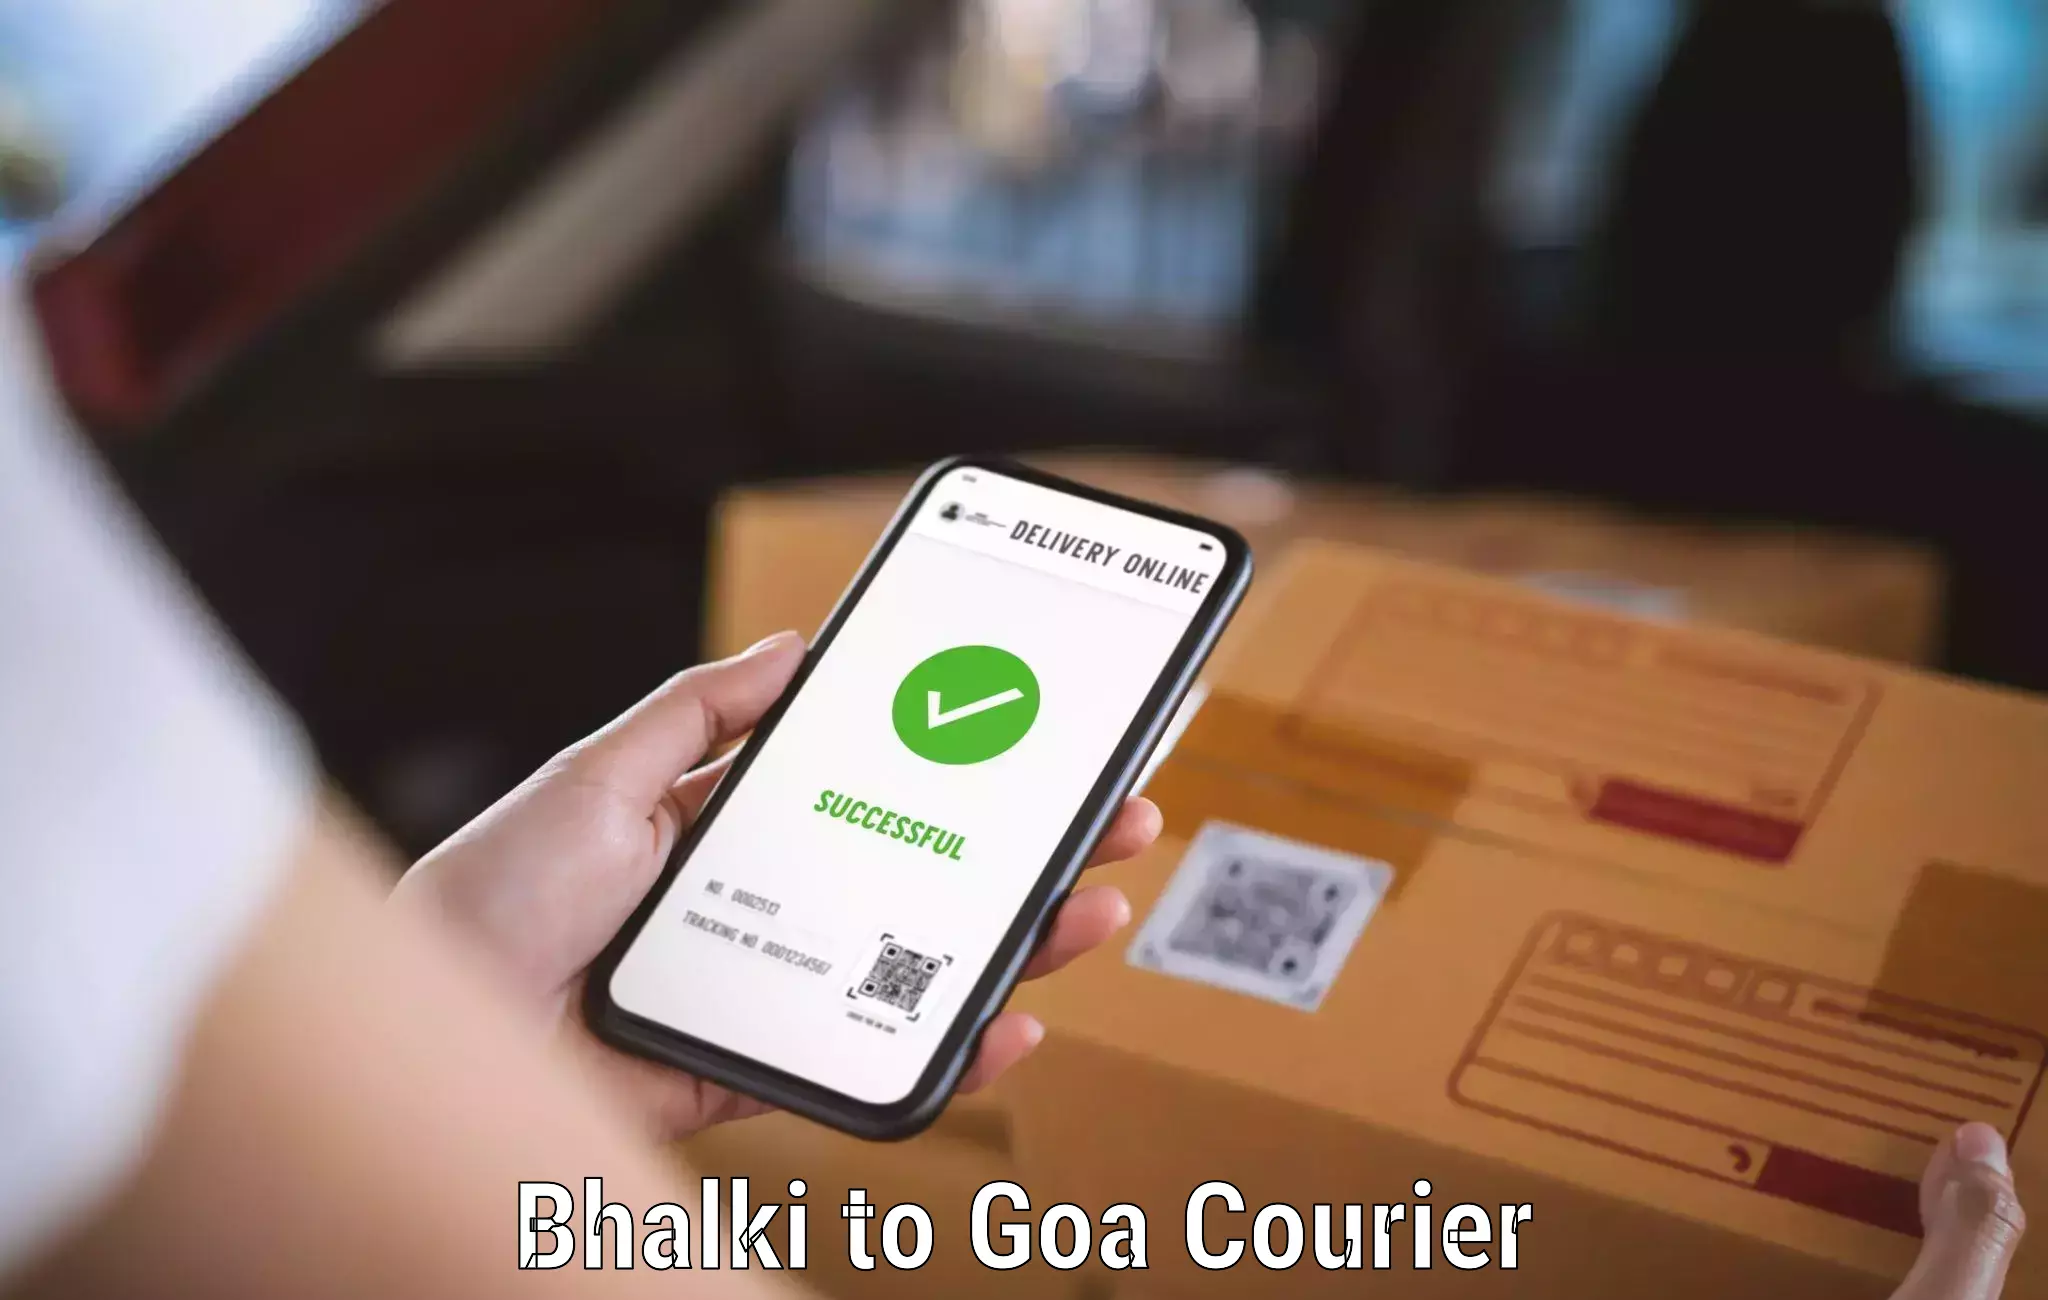 Cash on delivery service Bhalki to Goa